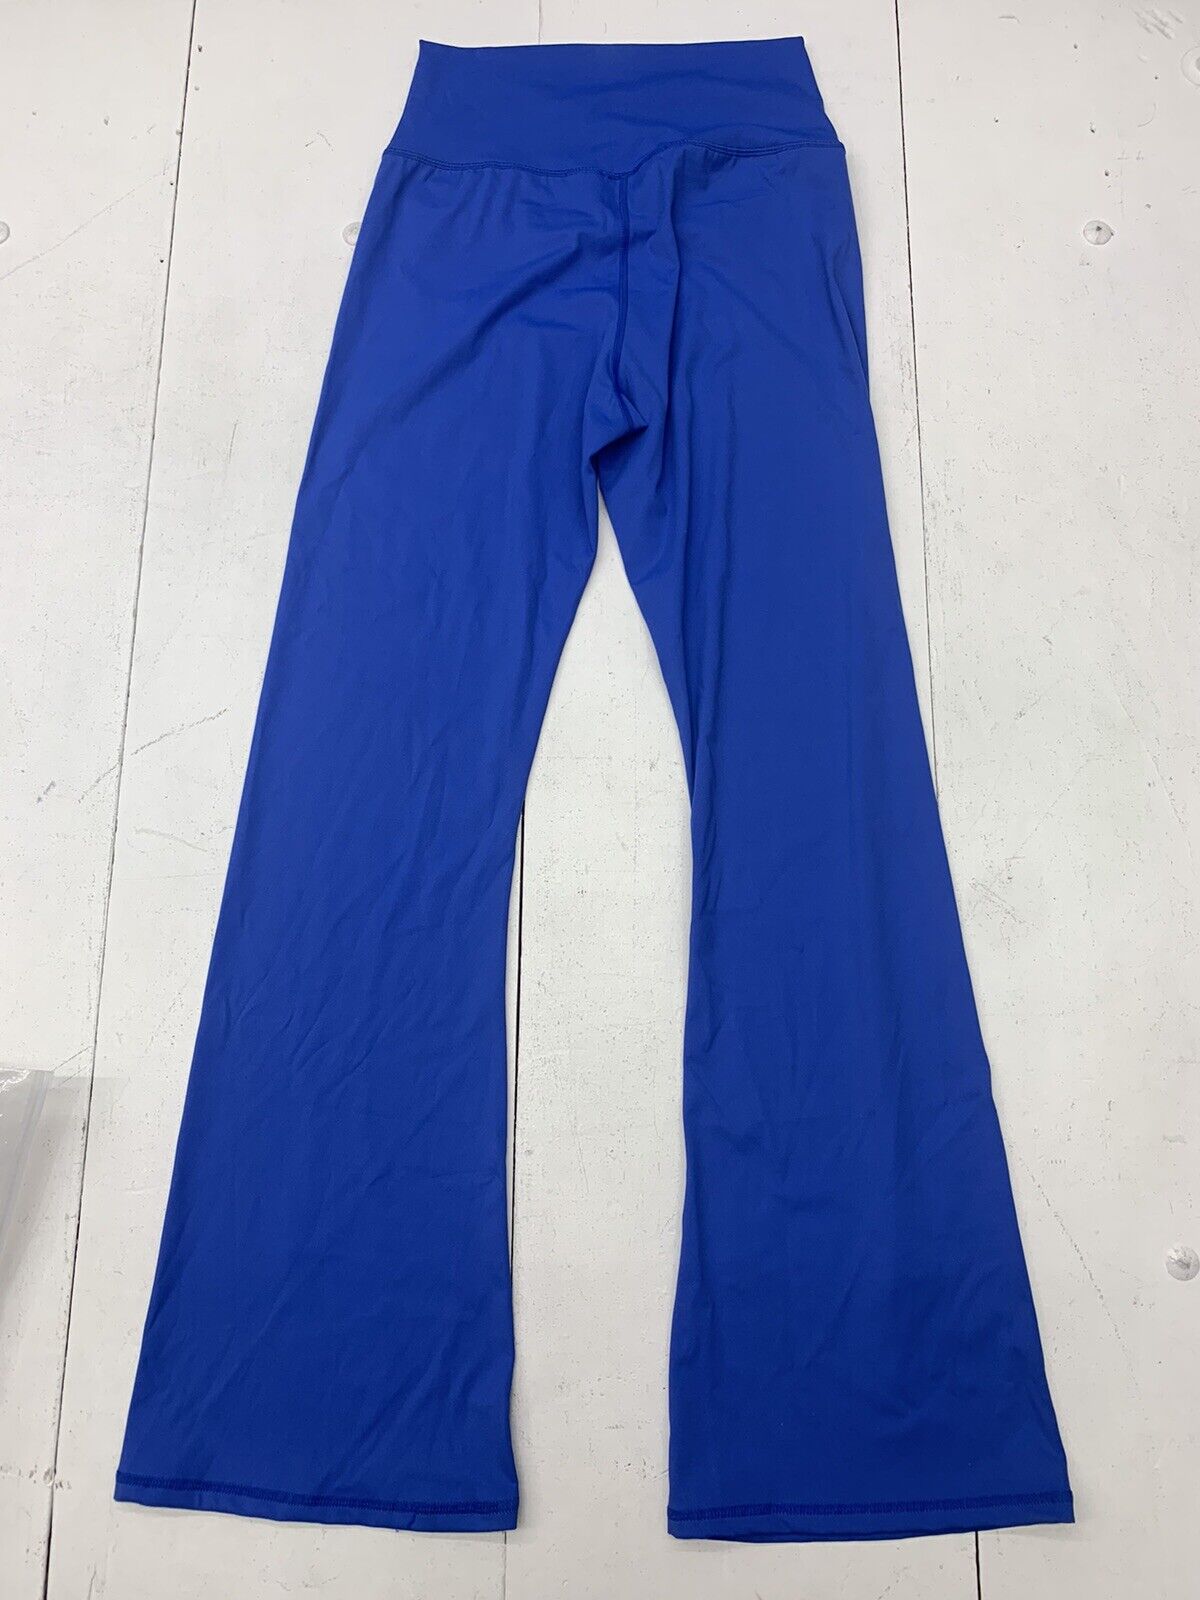 Unbranded Womens Blue High Waisted Athletic Leggings Size Large